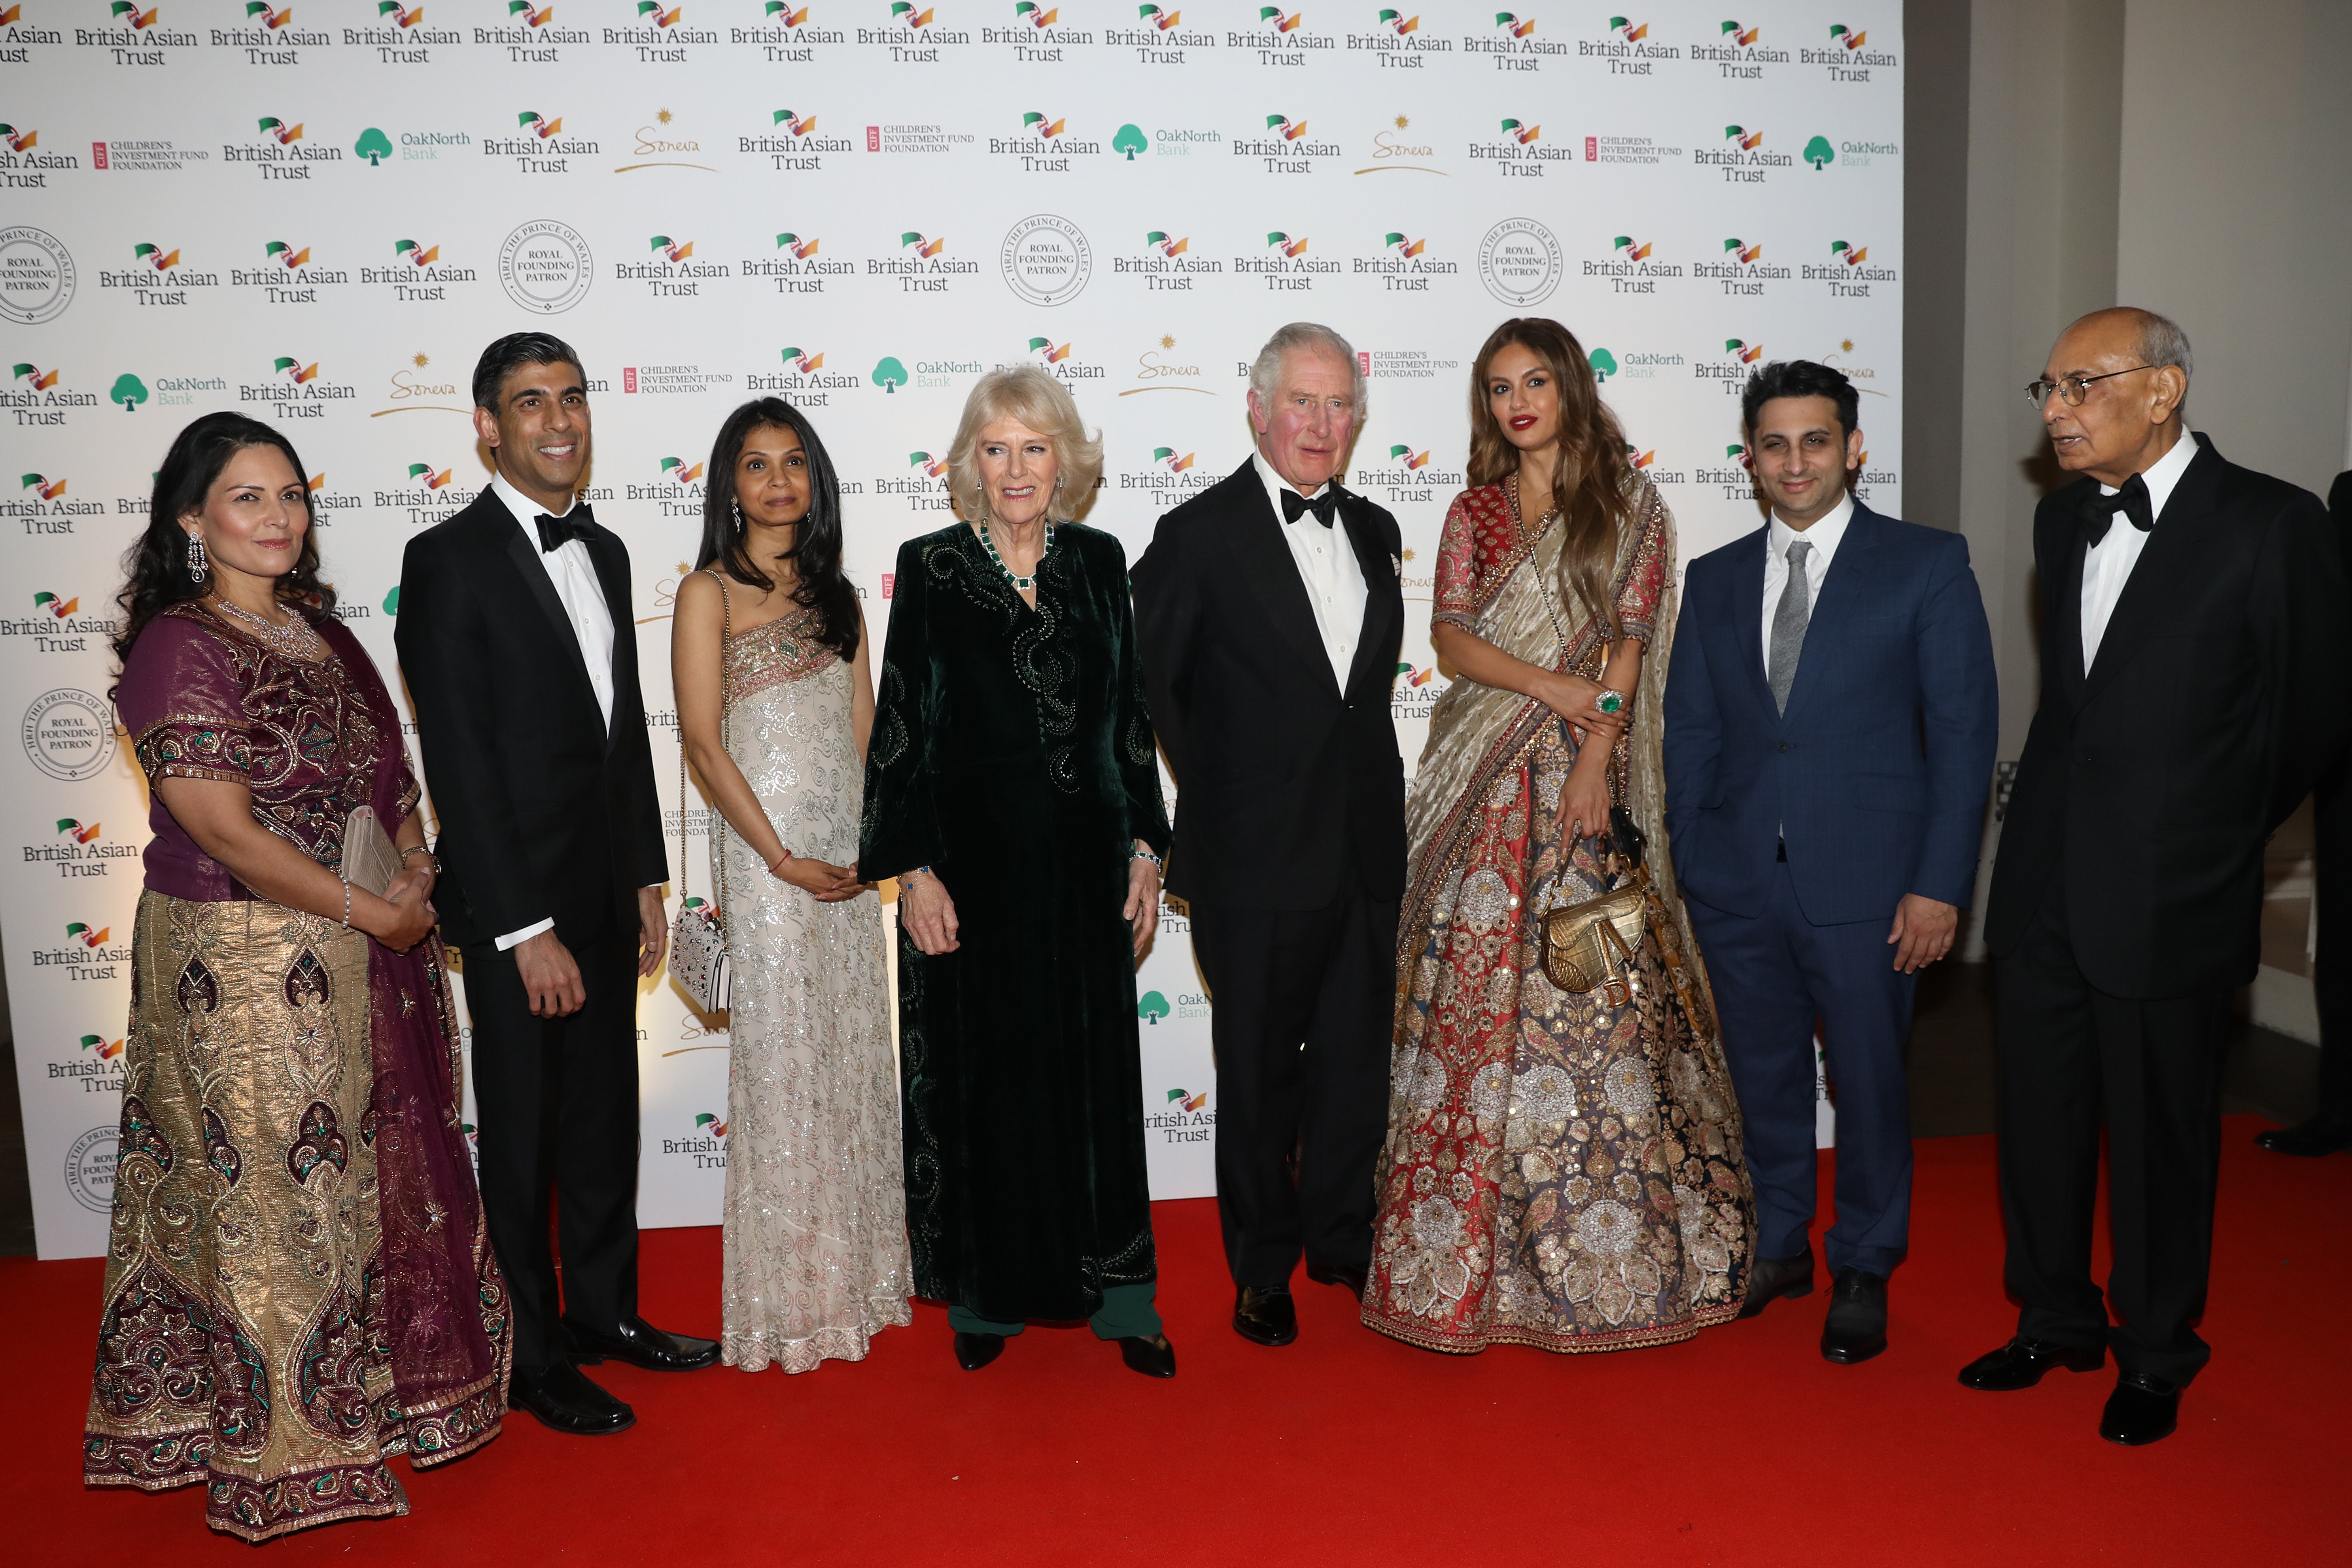 Prince Charles with Rishi Sunak and Priti Patel at an event a day before testing positive for Covid